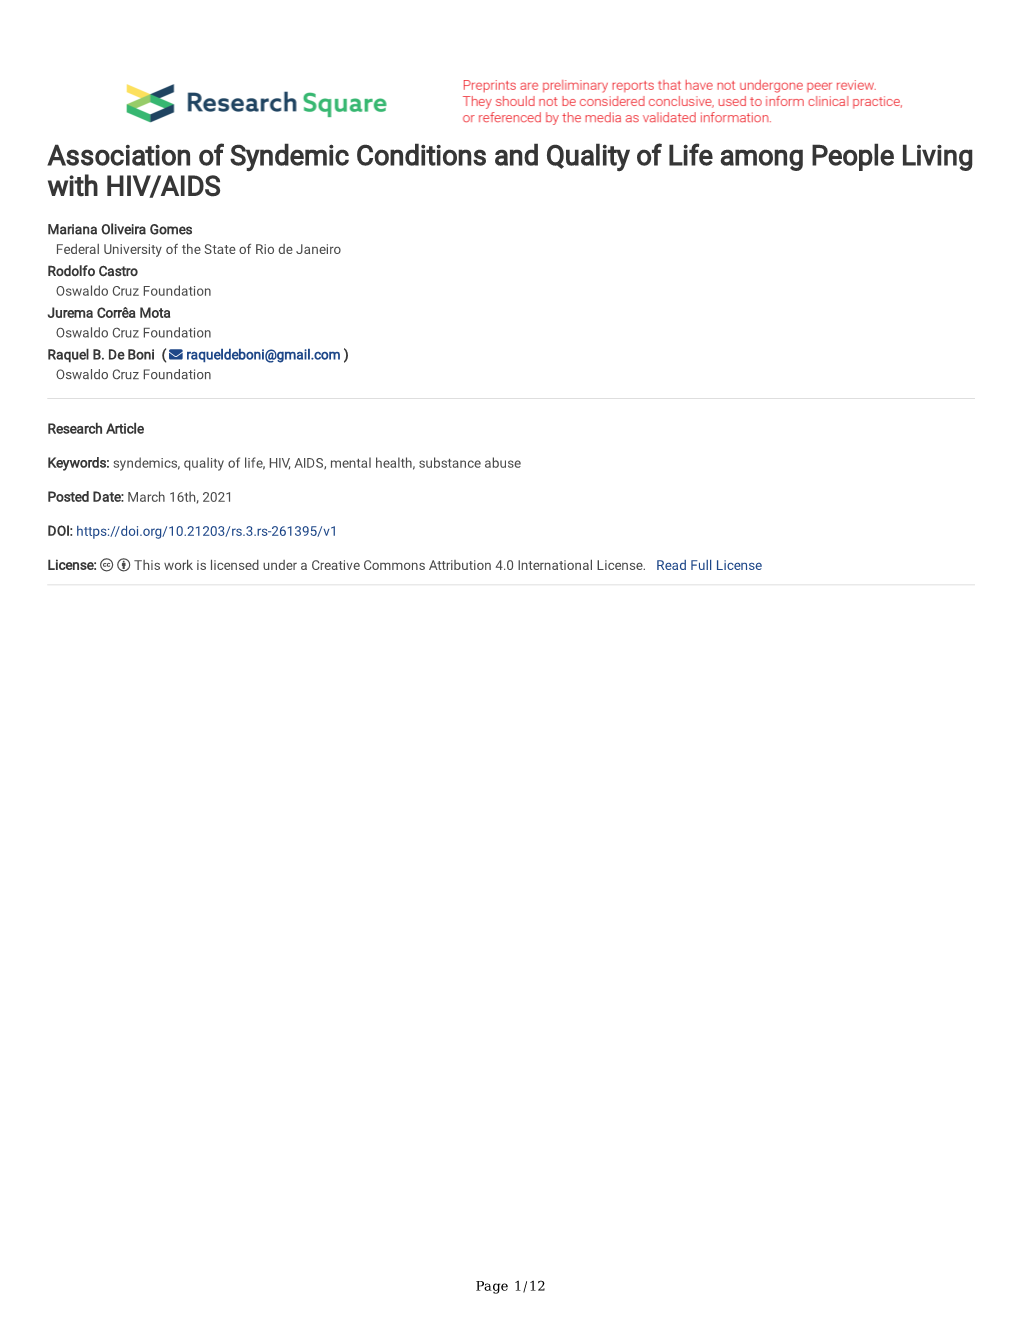 Association of Syndemic Conditions and Quality of Life Among People Living with HIV/AIDS